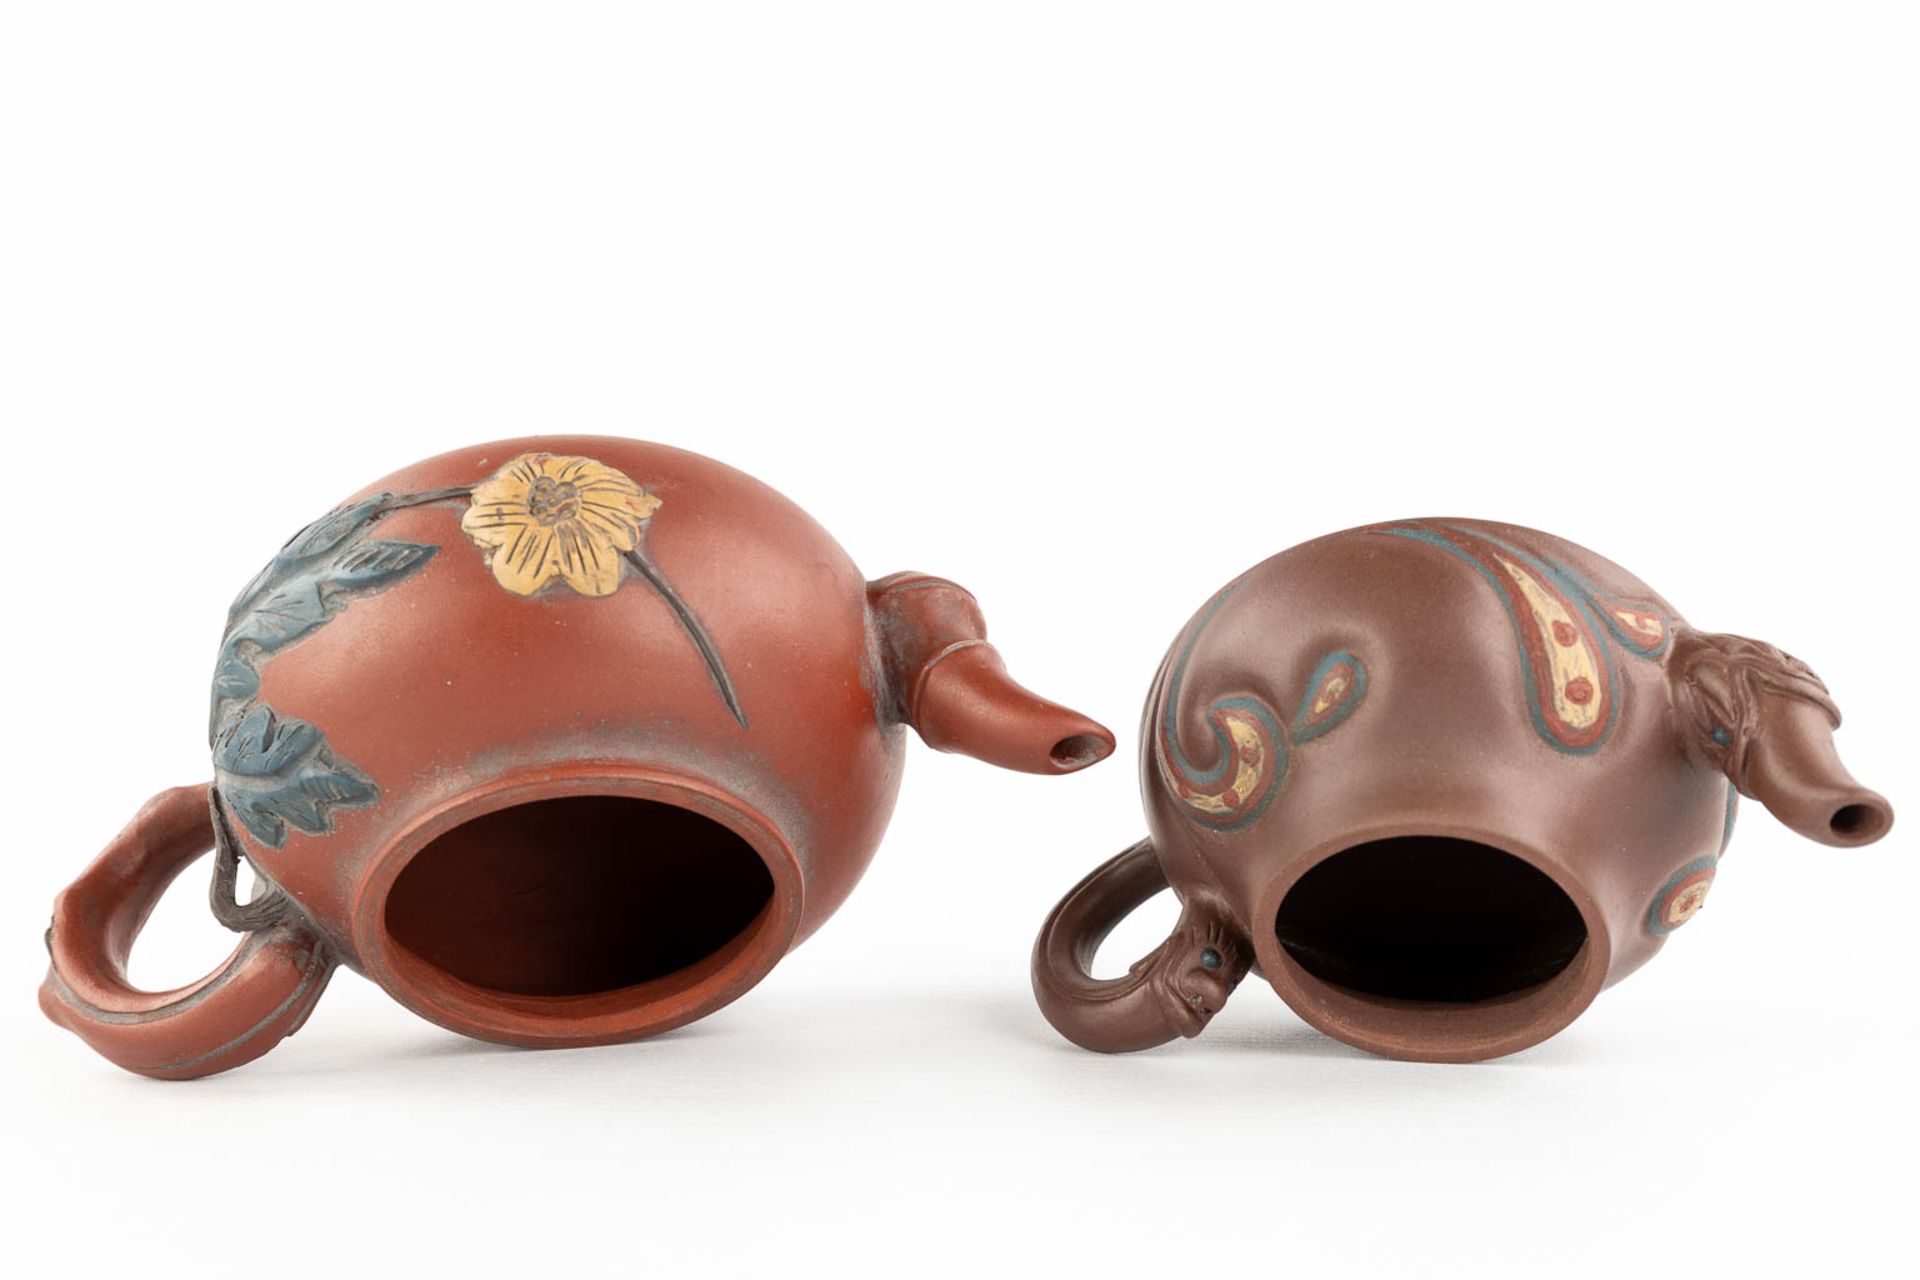 Two Chinese Yixing stoneware teapots, 20th C. (L:11 x W:18 x H:10 cm) - Image 11 of 18